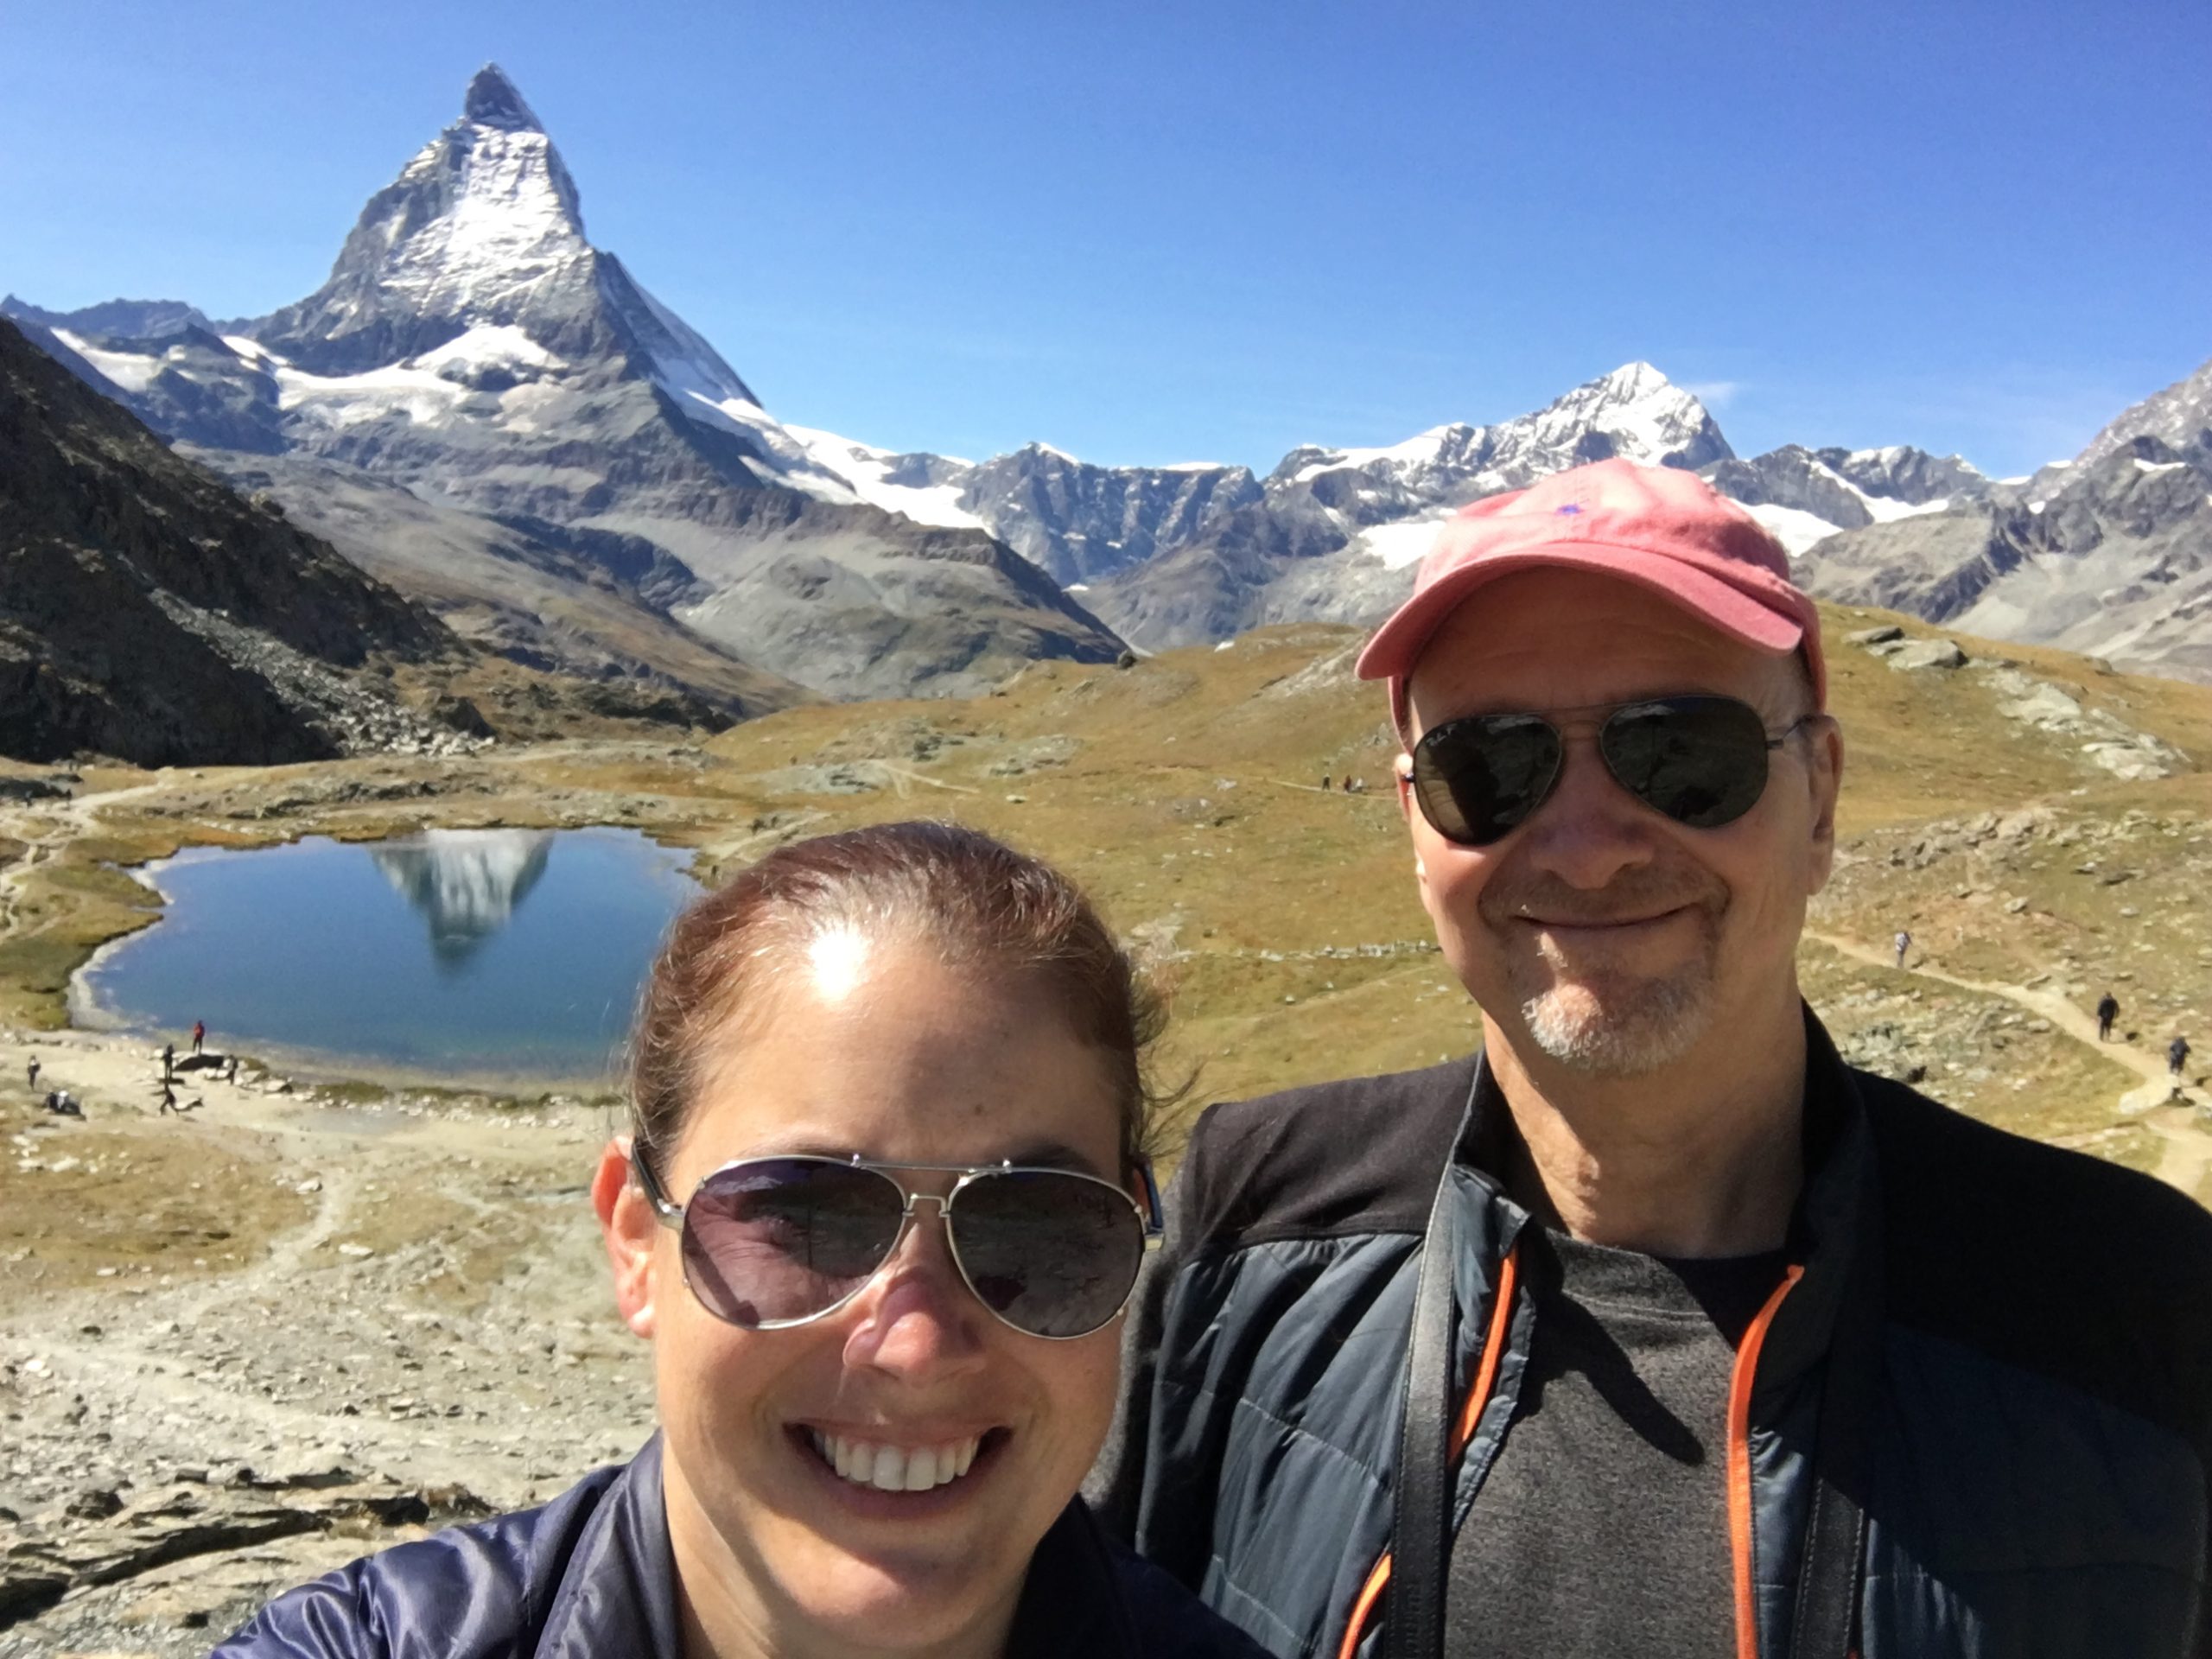 Two people in front of a Swiss landscape